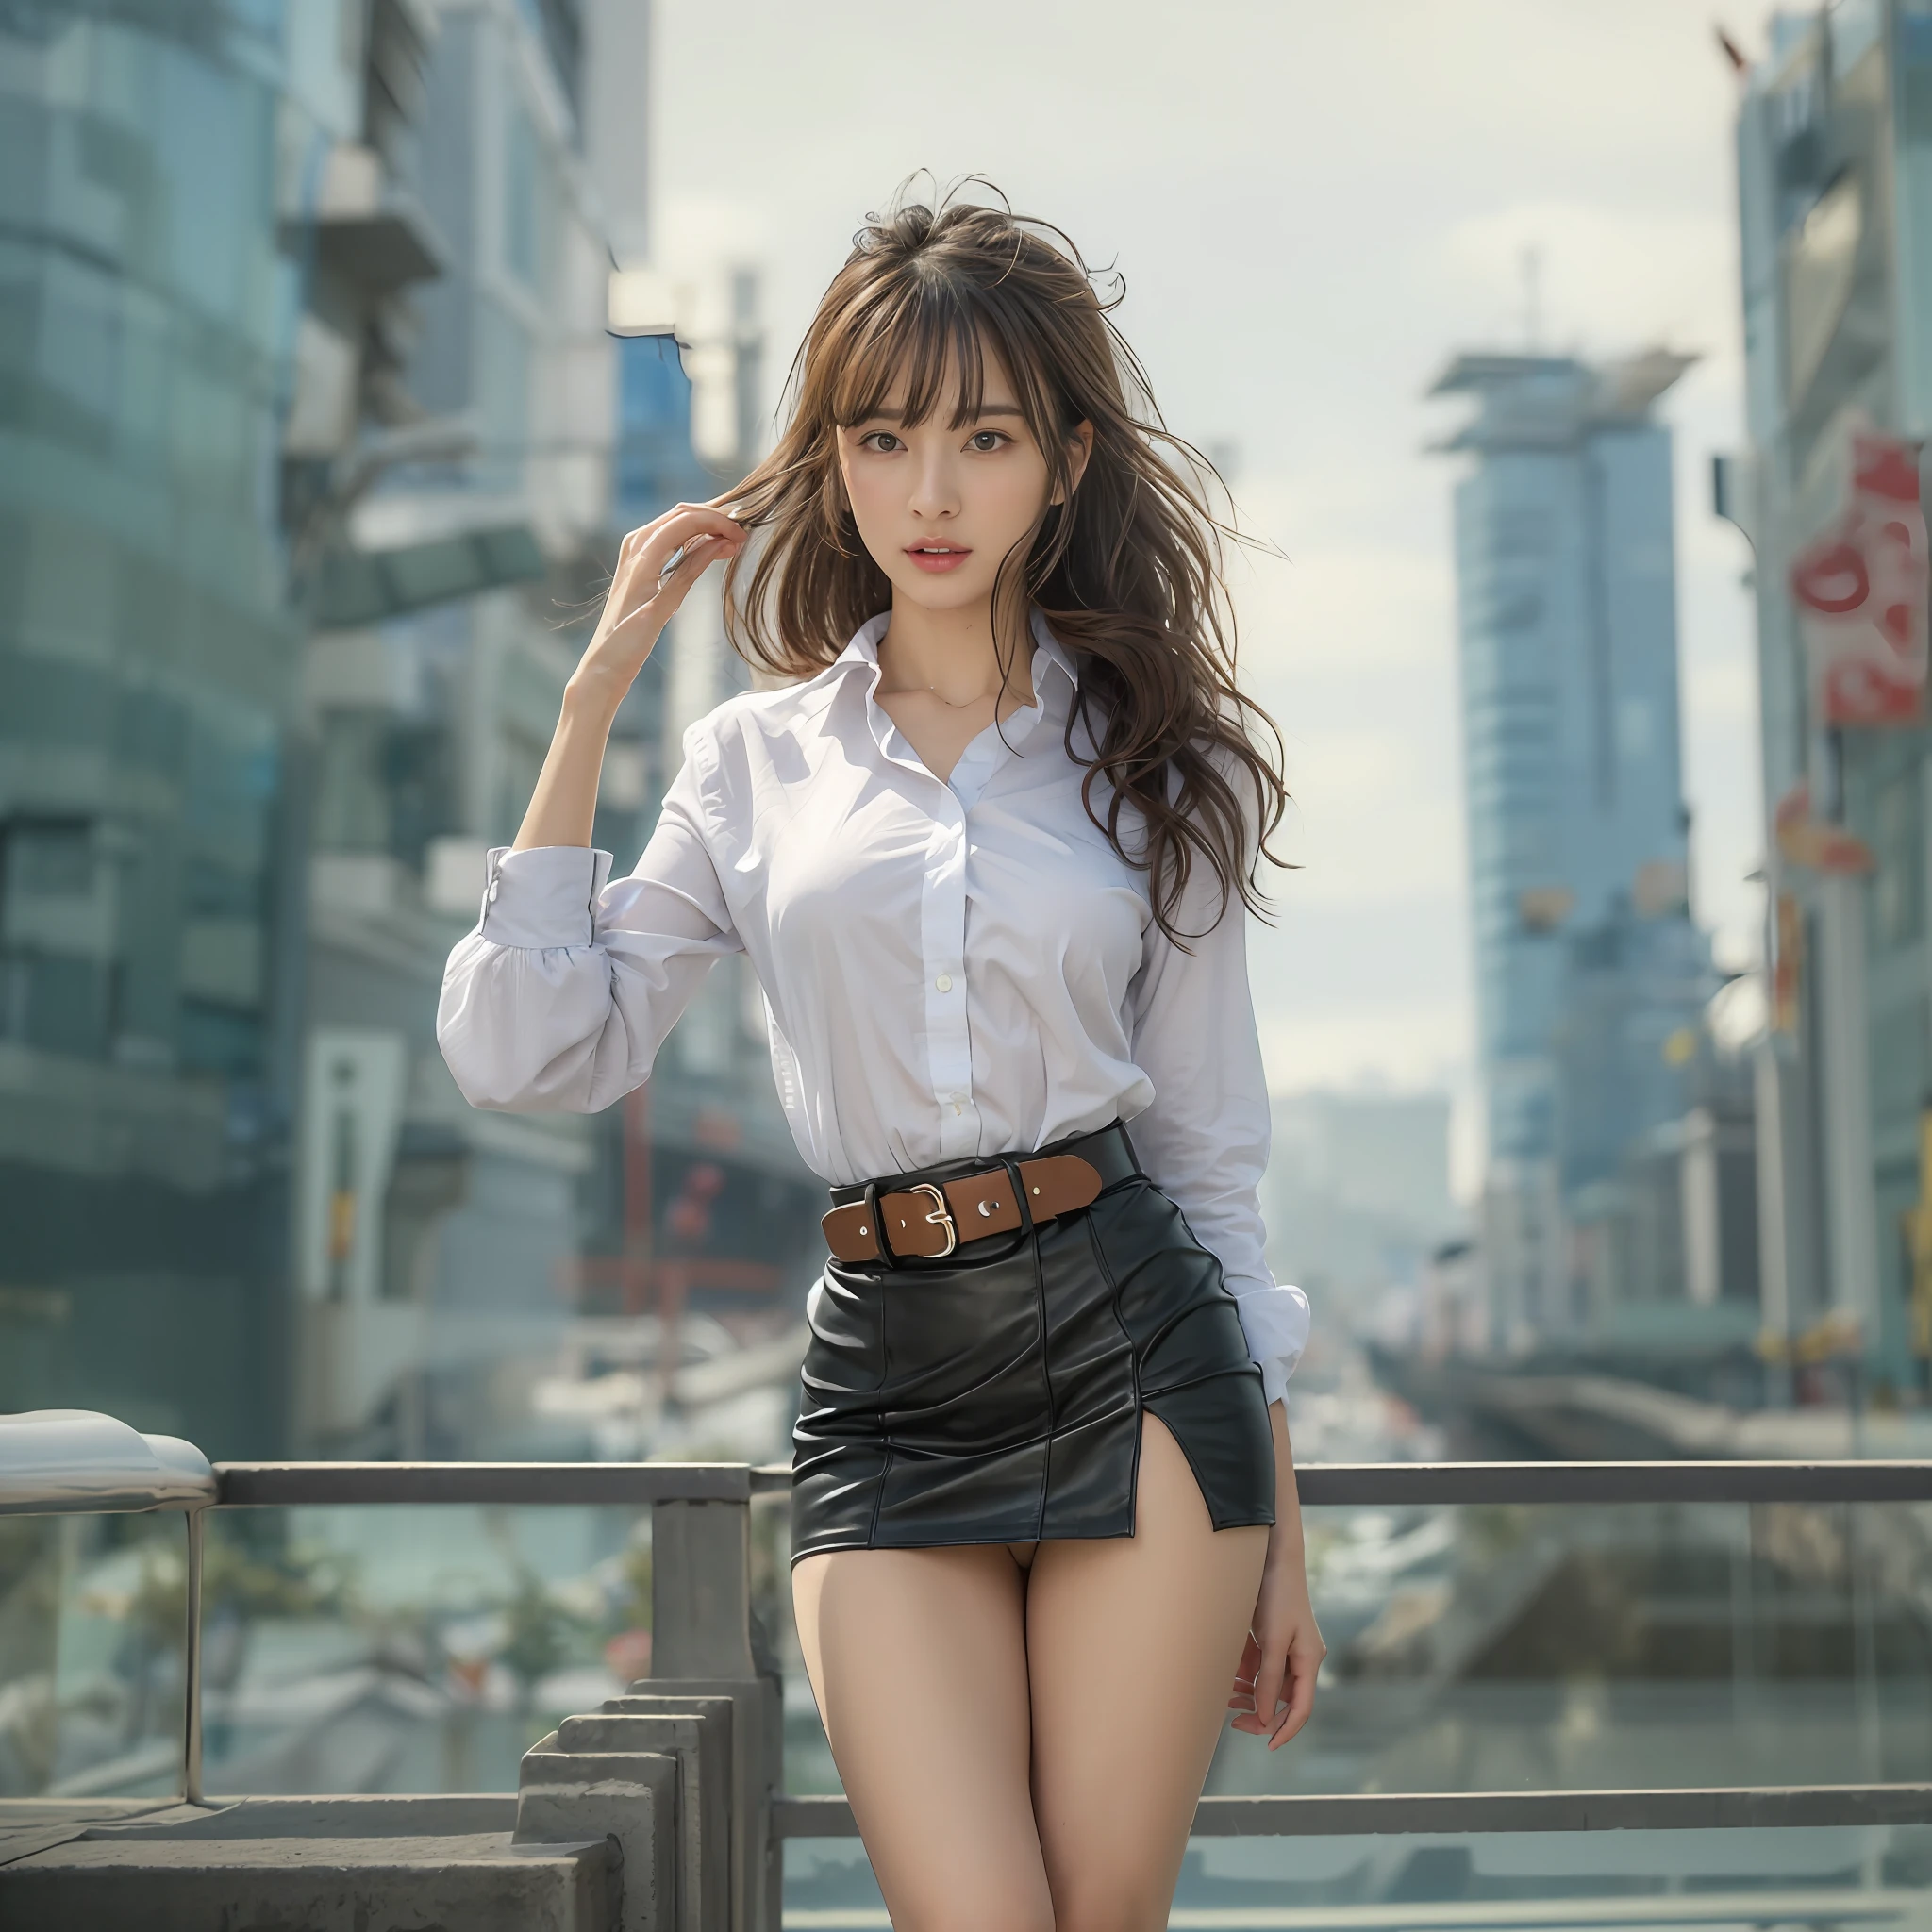 (​masterpiece:1.3), (8K, Photorealsitic, Raw photography, top-quality: 1.4), (1girl in), A pretty woman with perfect figure:1.4, cute  face, beautiful countenance, (Lifelike face), Beautiful hairstyle, realisticeyes, beautiful detail, (real looking skin), Beautiful skins, enticing, The ultra -The high-definition, A hyper-realistic, ighly detailed, (small tits:1.3), (cleavage of the breast:0.8)、White button-up shirt、a belt、Black leather tight skirt、Like Emily O'Hara Ratajkowski Japan, Semi-long curly hair、bangss、(Brown hair、1.3)、(slim figure))、Kojiri、(small and beatiful model pose、is standing、long bootodern architecture in background)、Walking、Red underwear is visible